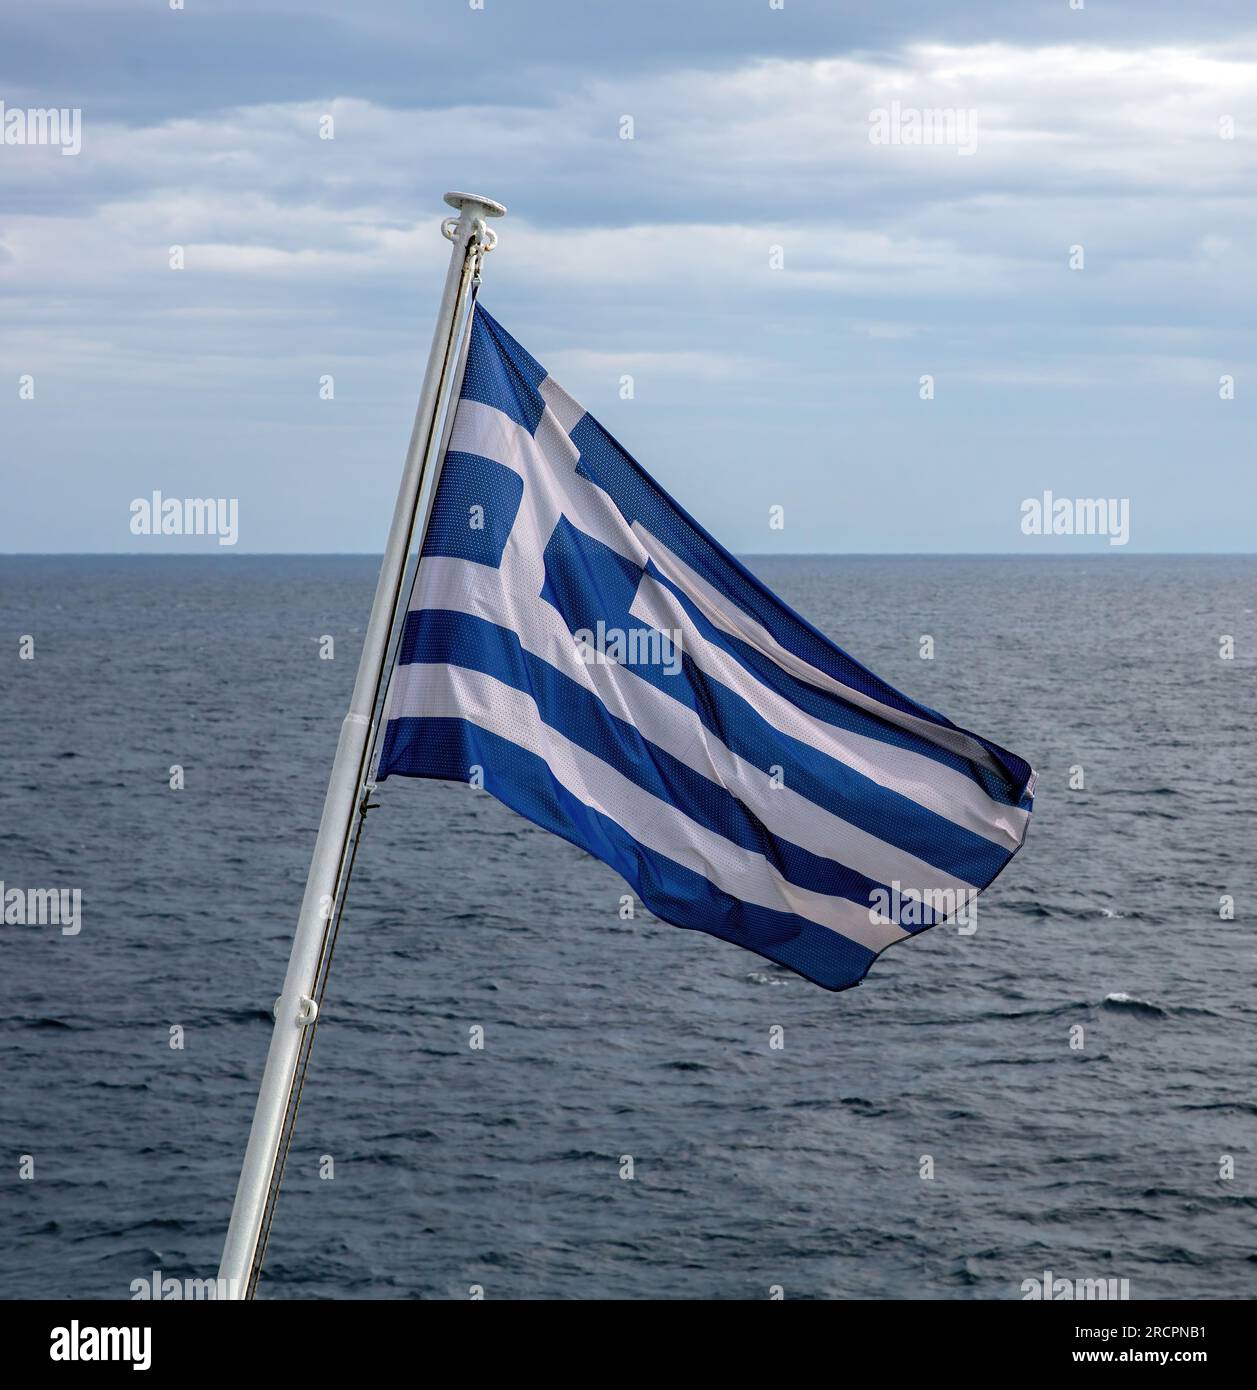 Greece sign symbol of leading shipping power in the world. Greek flag on flagpole waving over rippled sea water. Cloudy sky background. Stock Photo